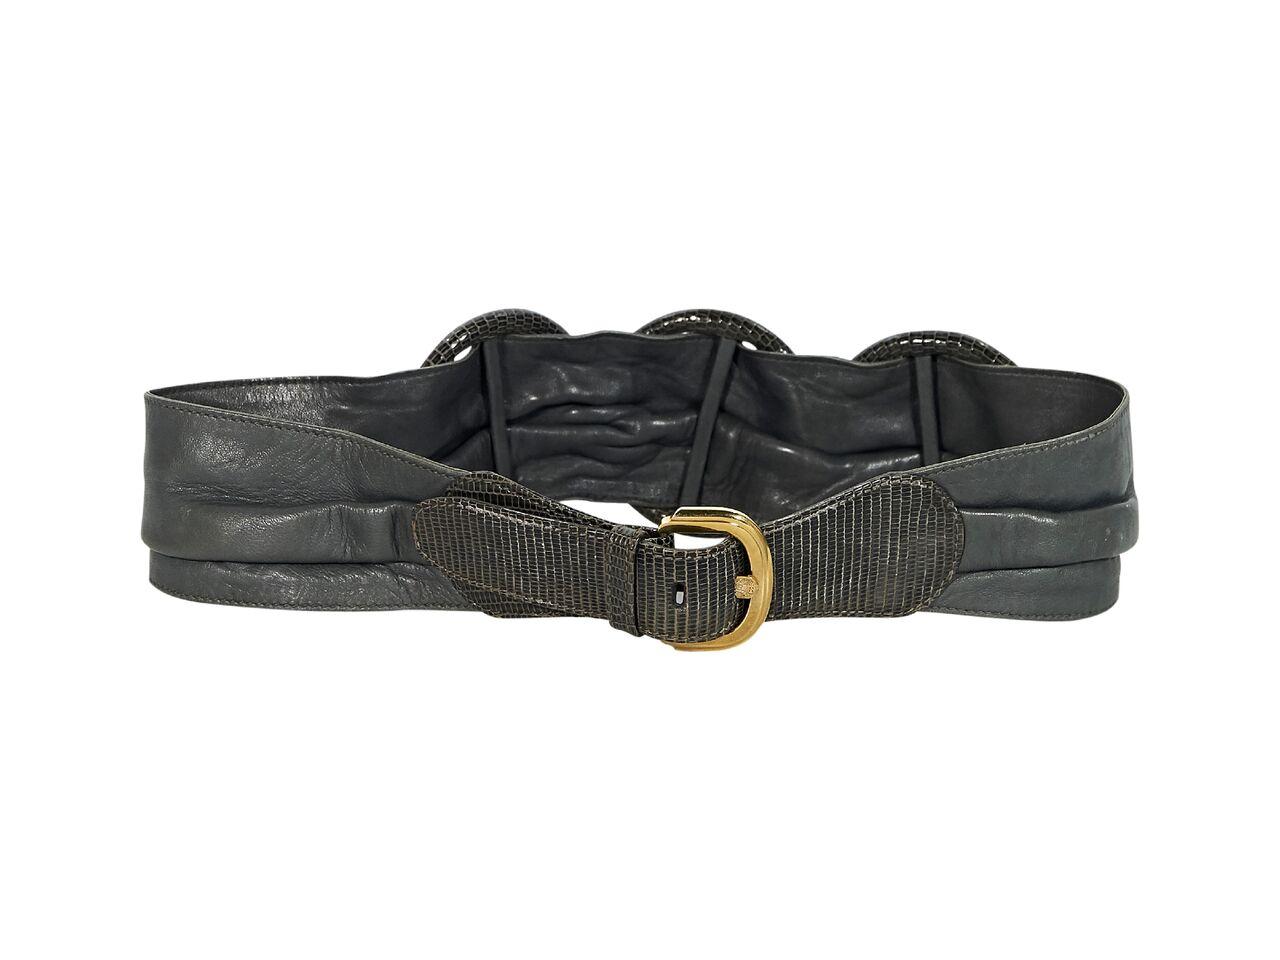 Product details:  Vintage grey leather belt by Gucci.  Accented with snakeskin circular details.  Adjustable buckle closure.  Goldtone hardware.  31.5